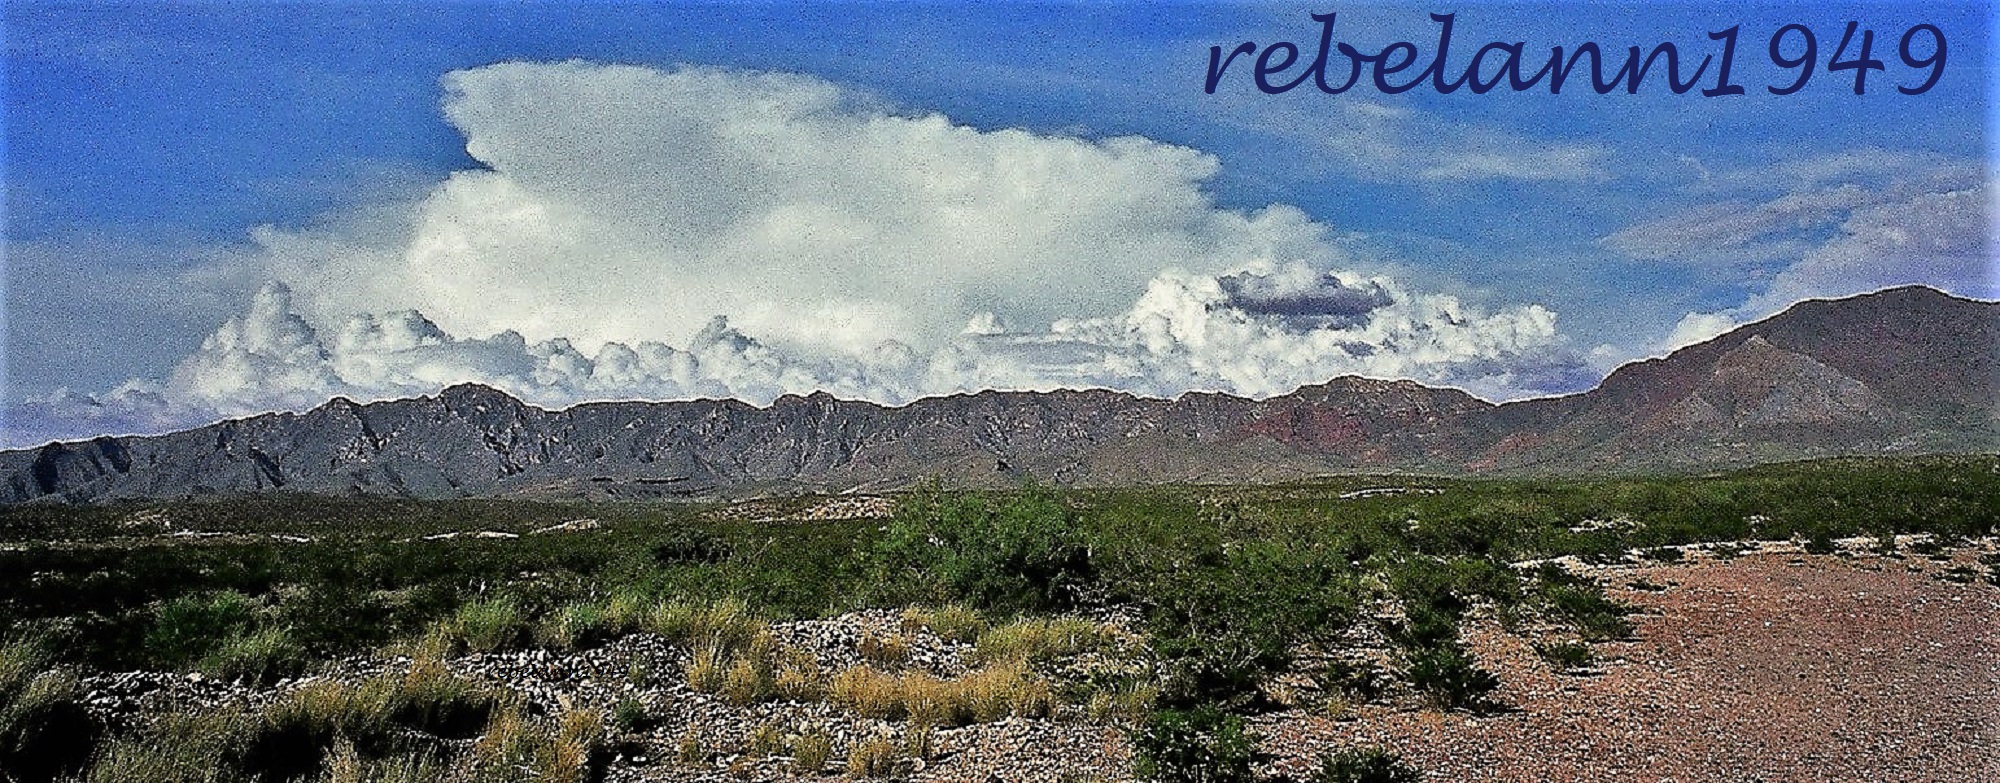 A shot I took of the Franklin Mountains many years ago